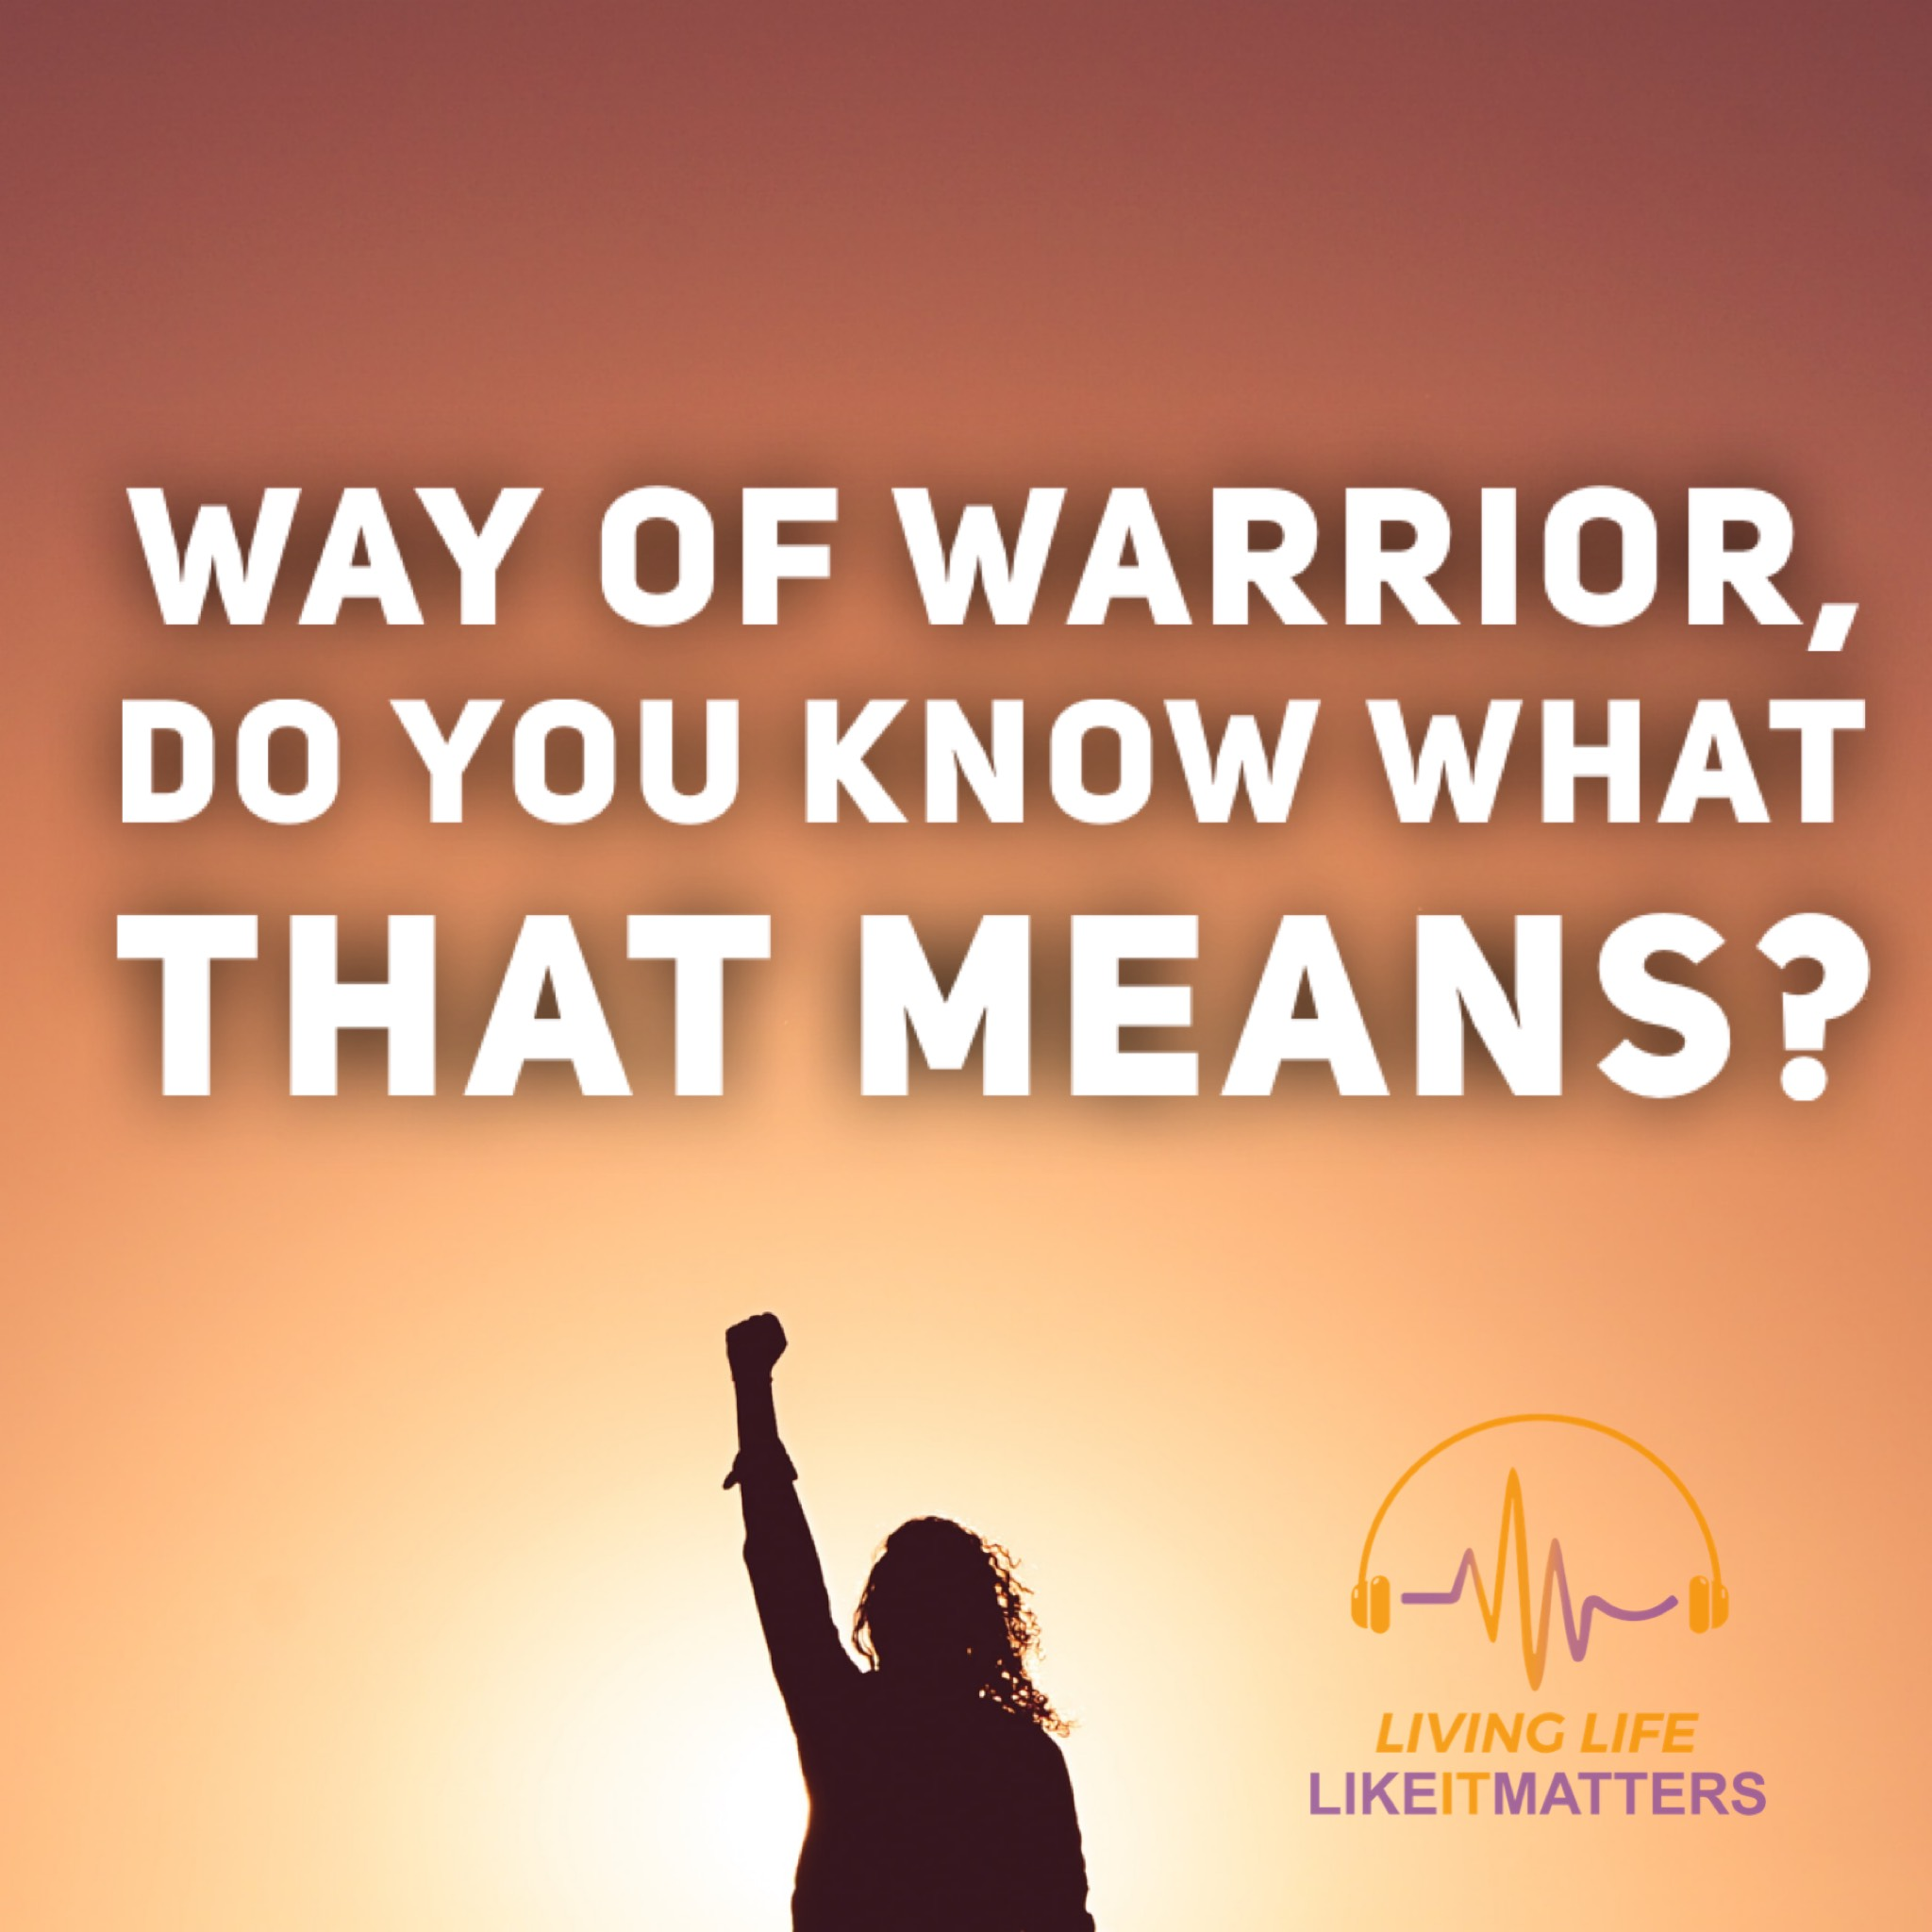 Way Of Warrior, Do You Know What That Means?